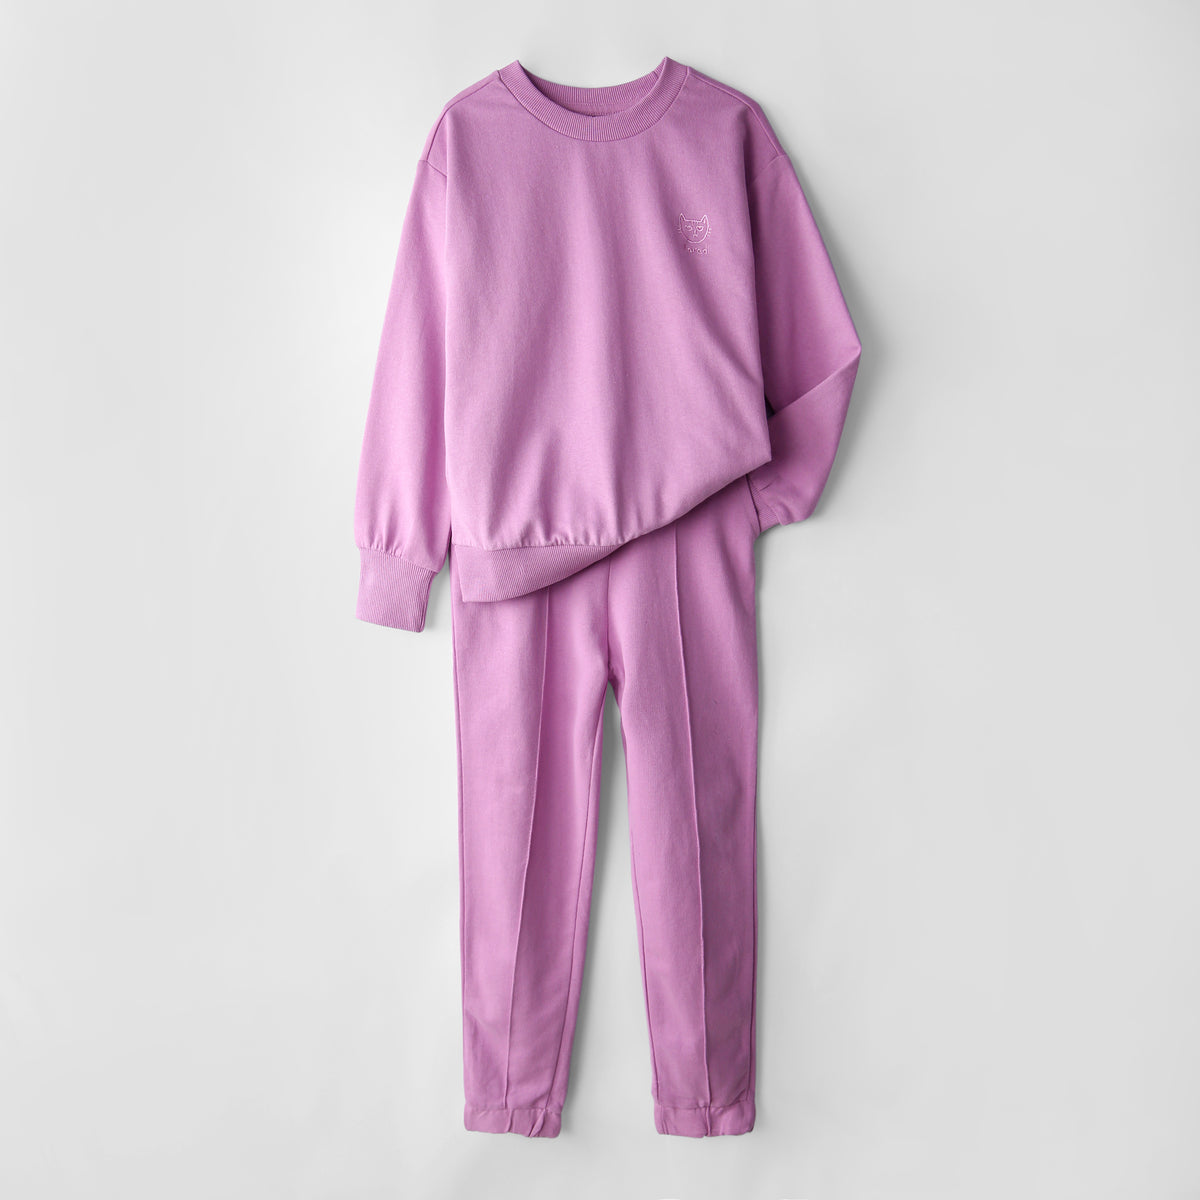 Premium Quality Soft Cotton Embroidered TrackSuit For Girls